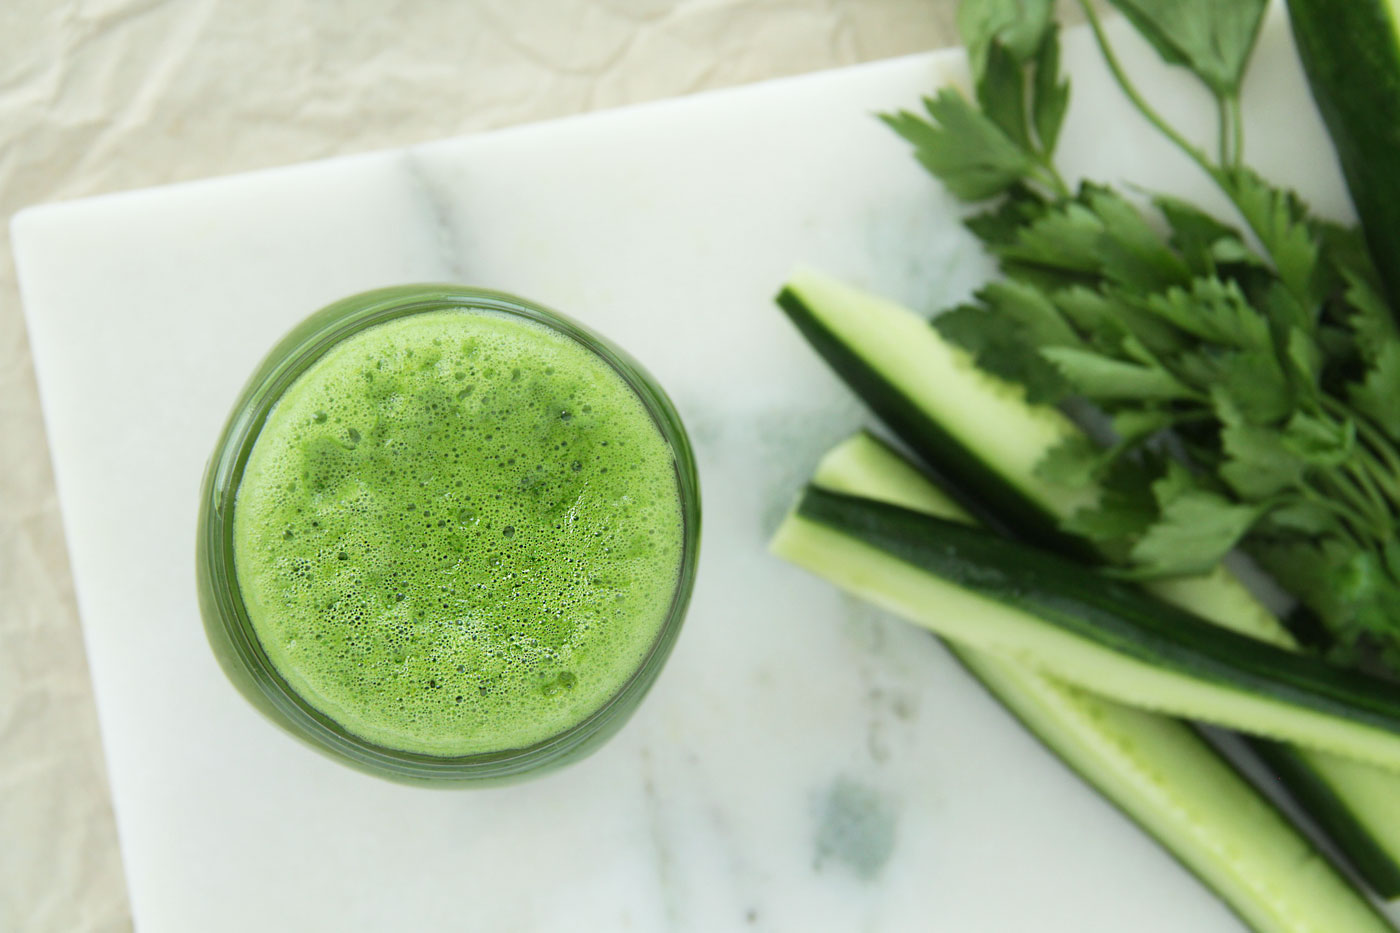 We are sharing this powerful, cleansing, mineralizing and one of our all-time favourite green juice recipe for detox.